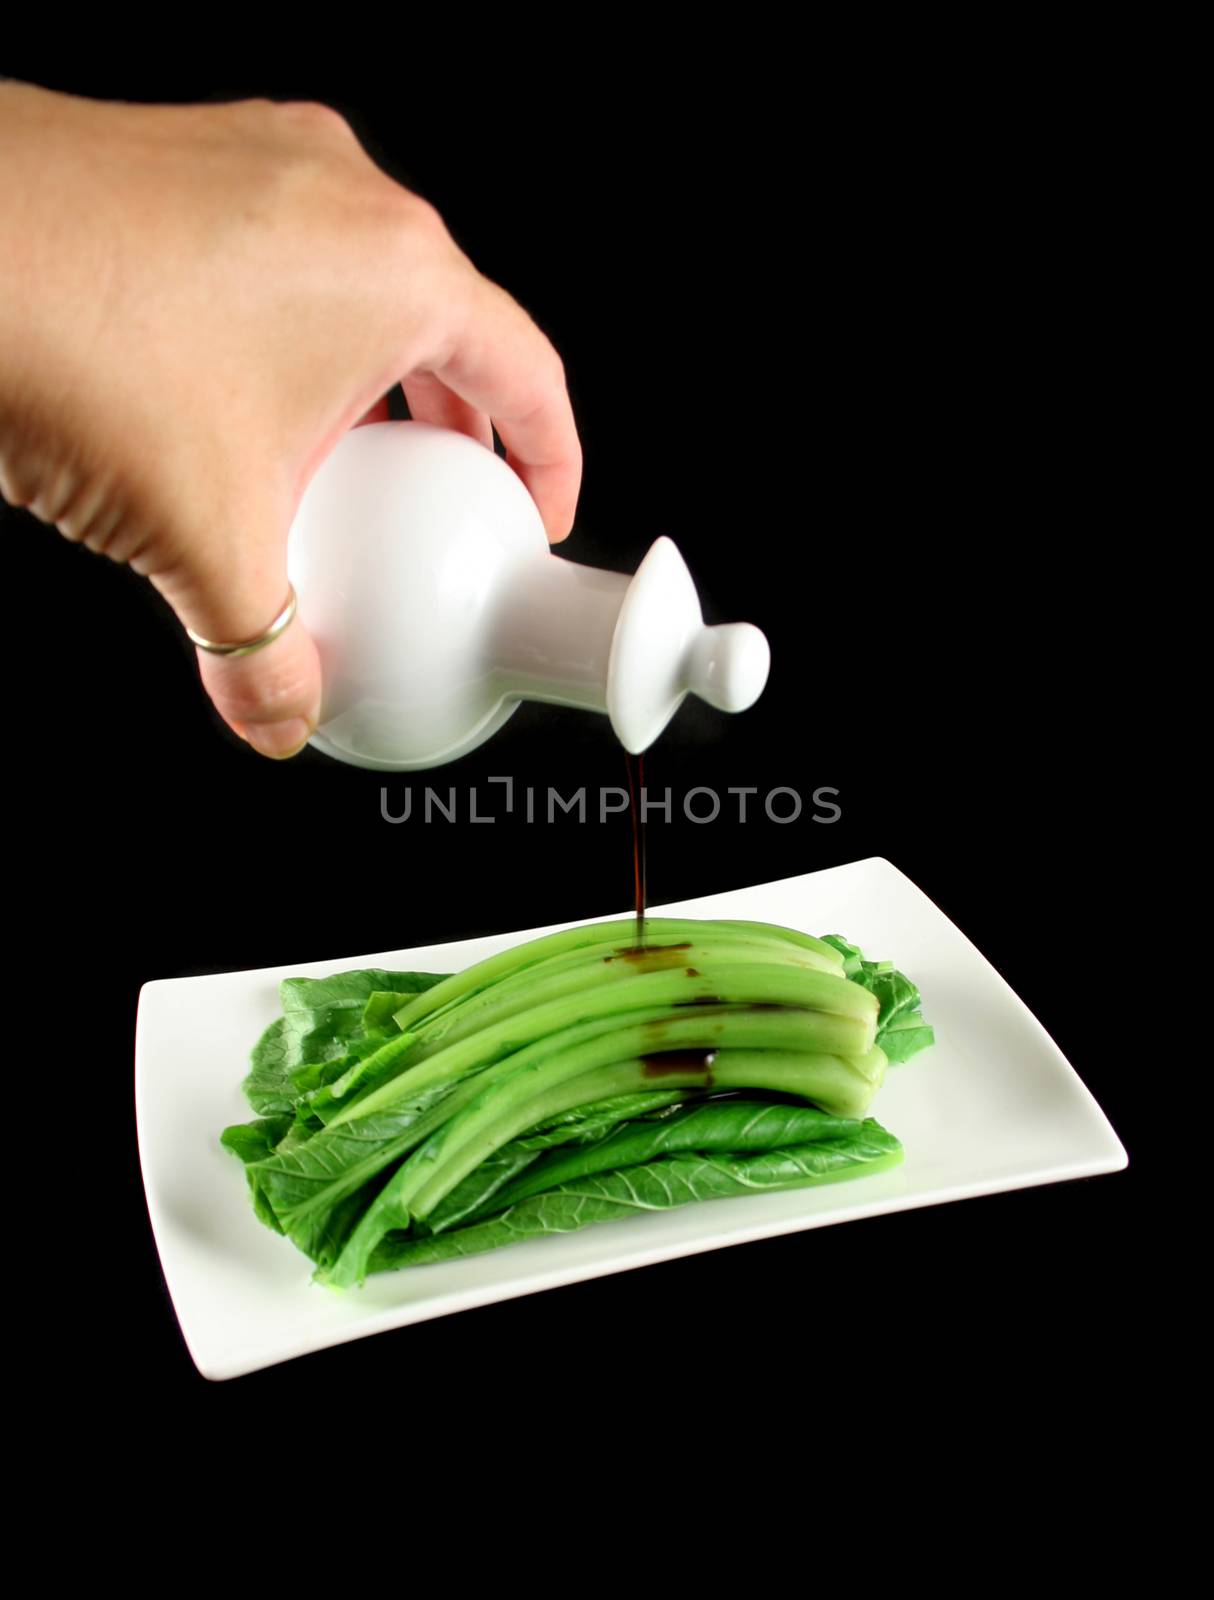 Soy sauce being poured on the Asian vegetable Choy Sum.